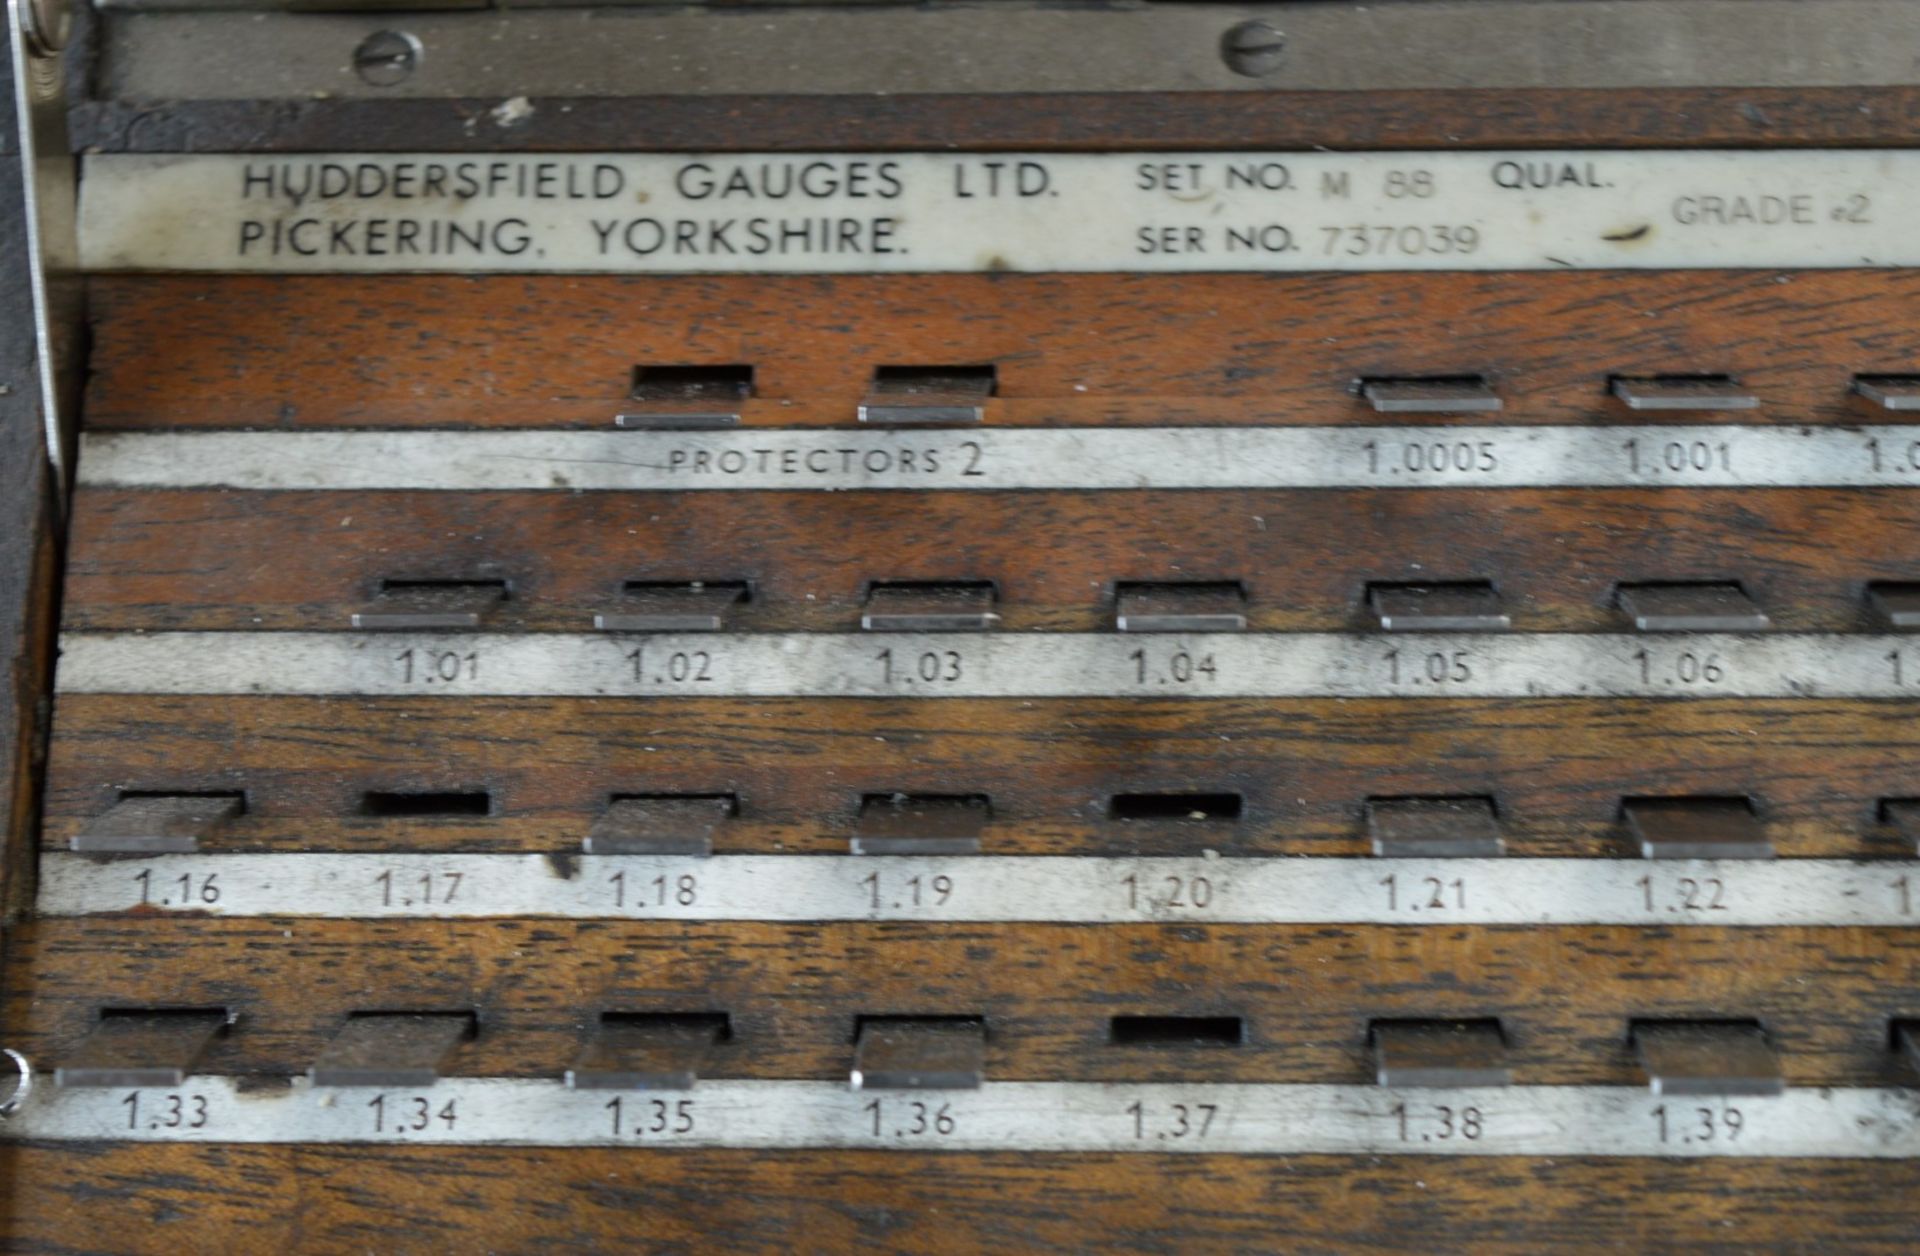 1 x Precise Engineering Gauge Block Set by Huddersfield Gaugs Ltd - Includes 75 Pieces and - Image 4 of 10